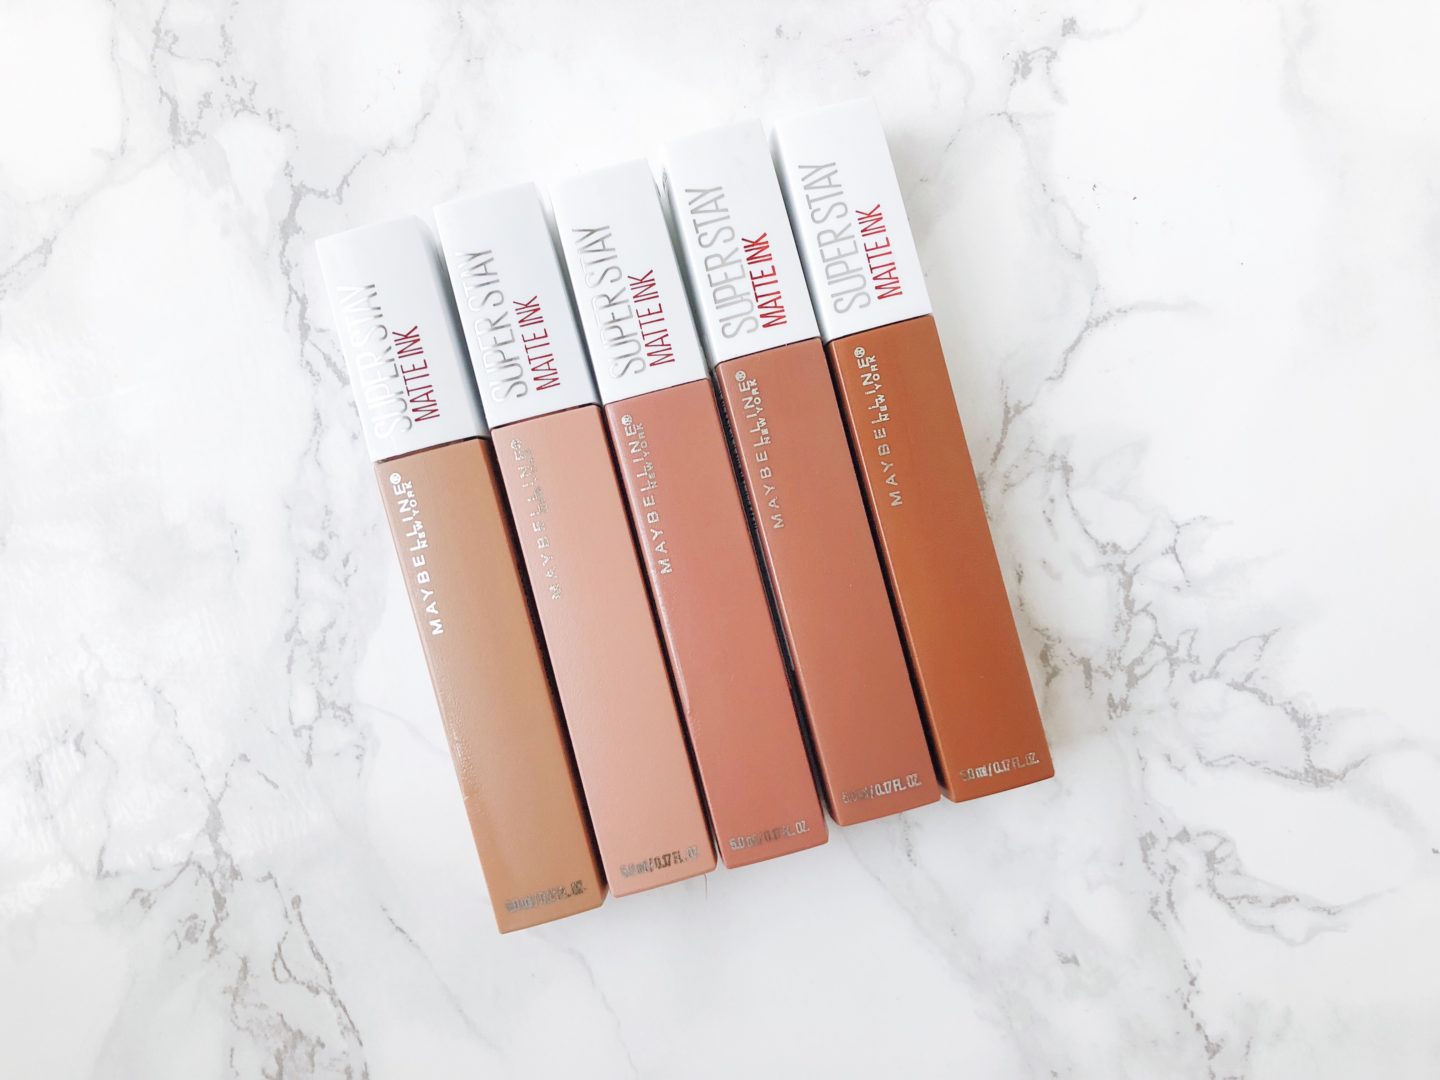 MAYBELLINE SUPER STAY MATTE INK UN-NUDE REVIEW 